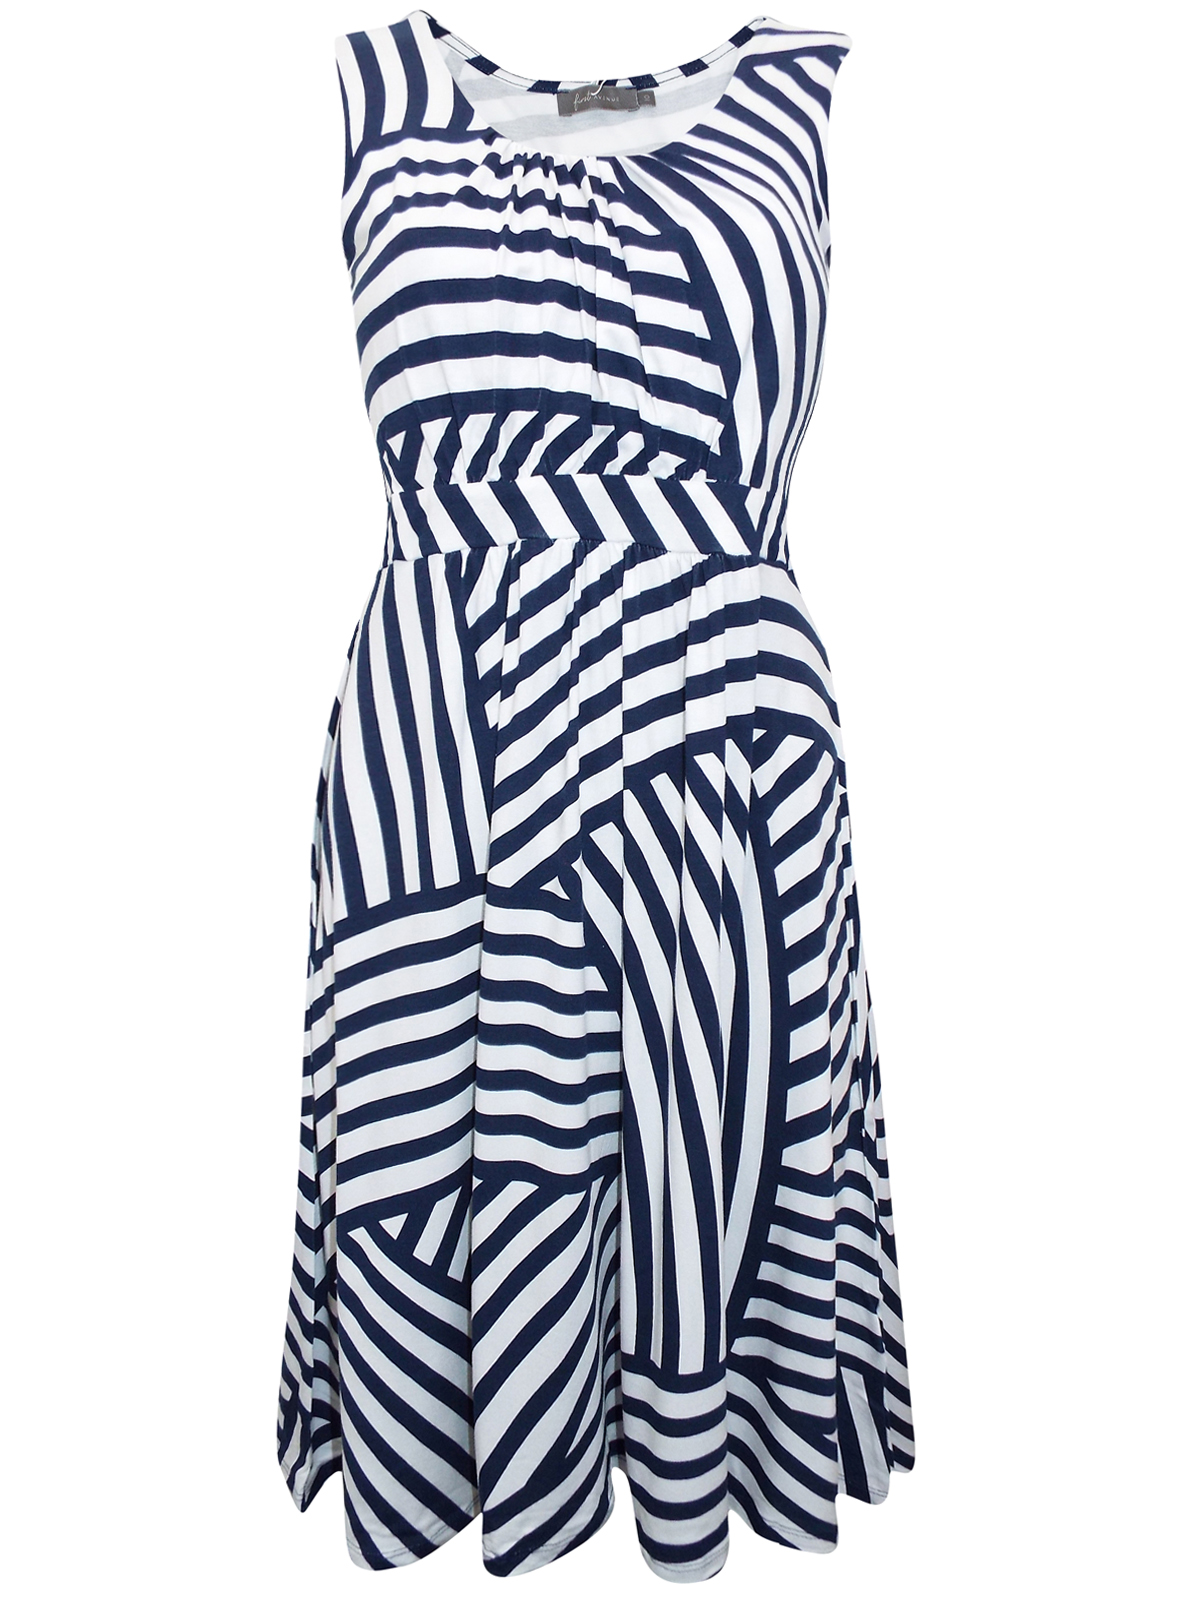 First Avenue NAVY Sleeveless Striped Jersey Dress - Size 10 to 20